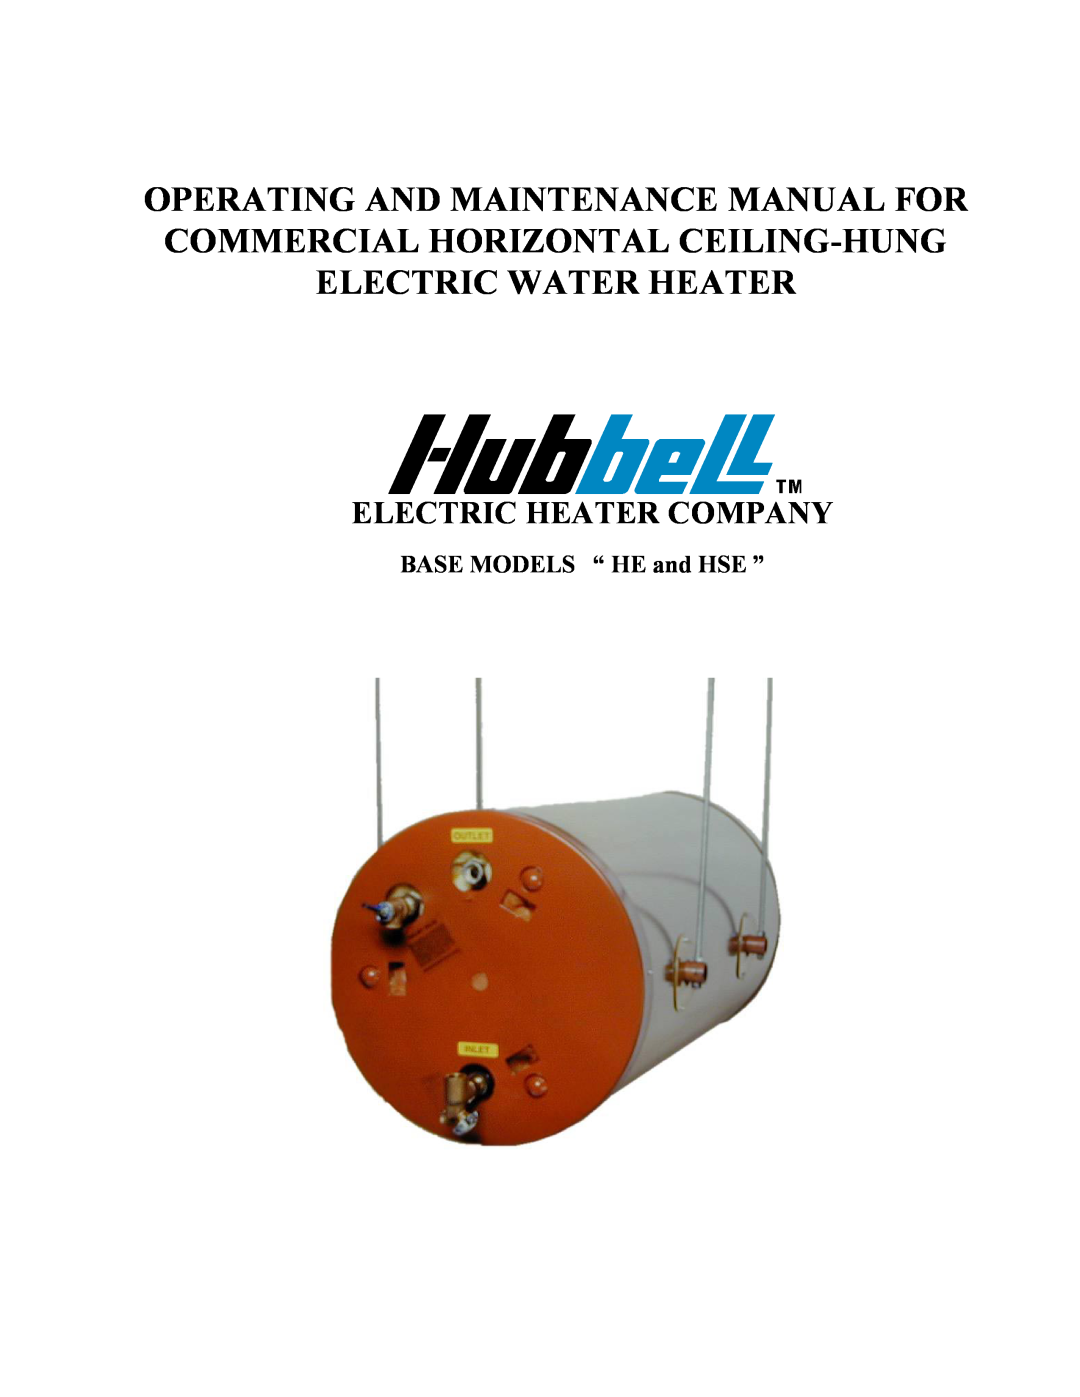 Hubbell Electric Heater Company manual BASE MODELS “ HE and HSE ”, Electric Heater Company 